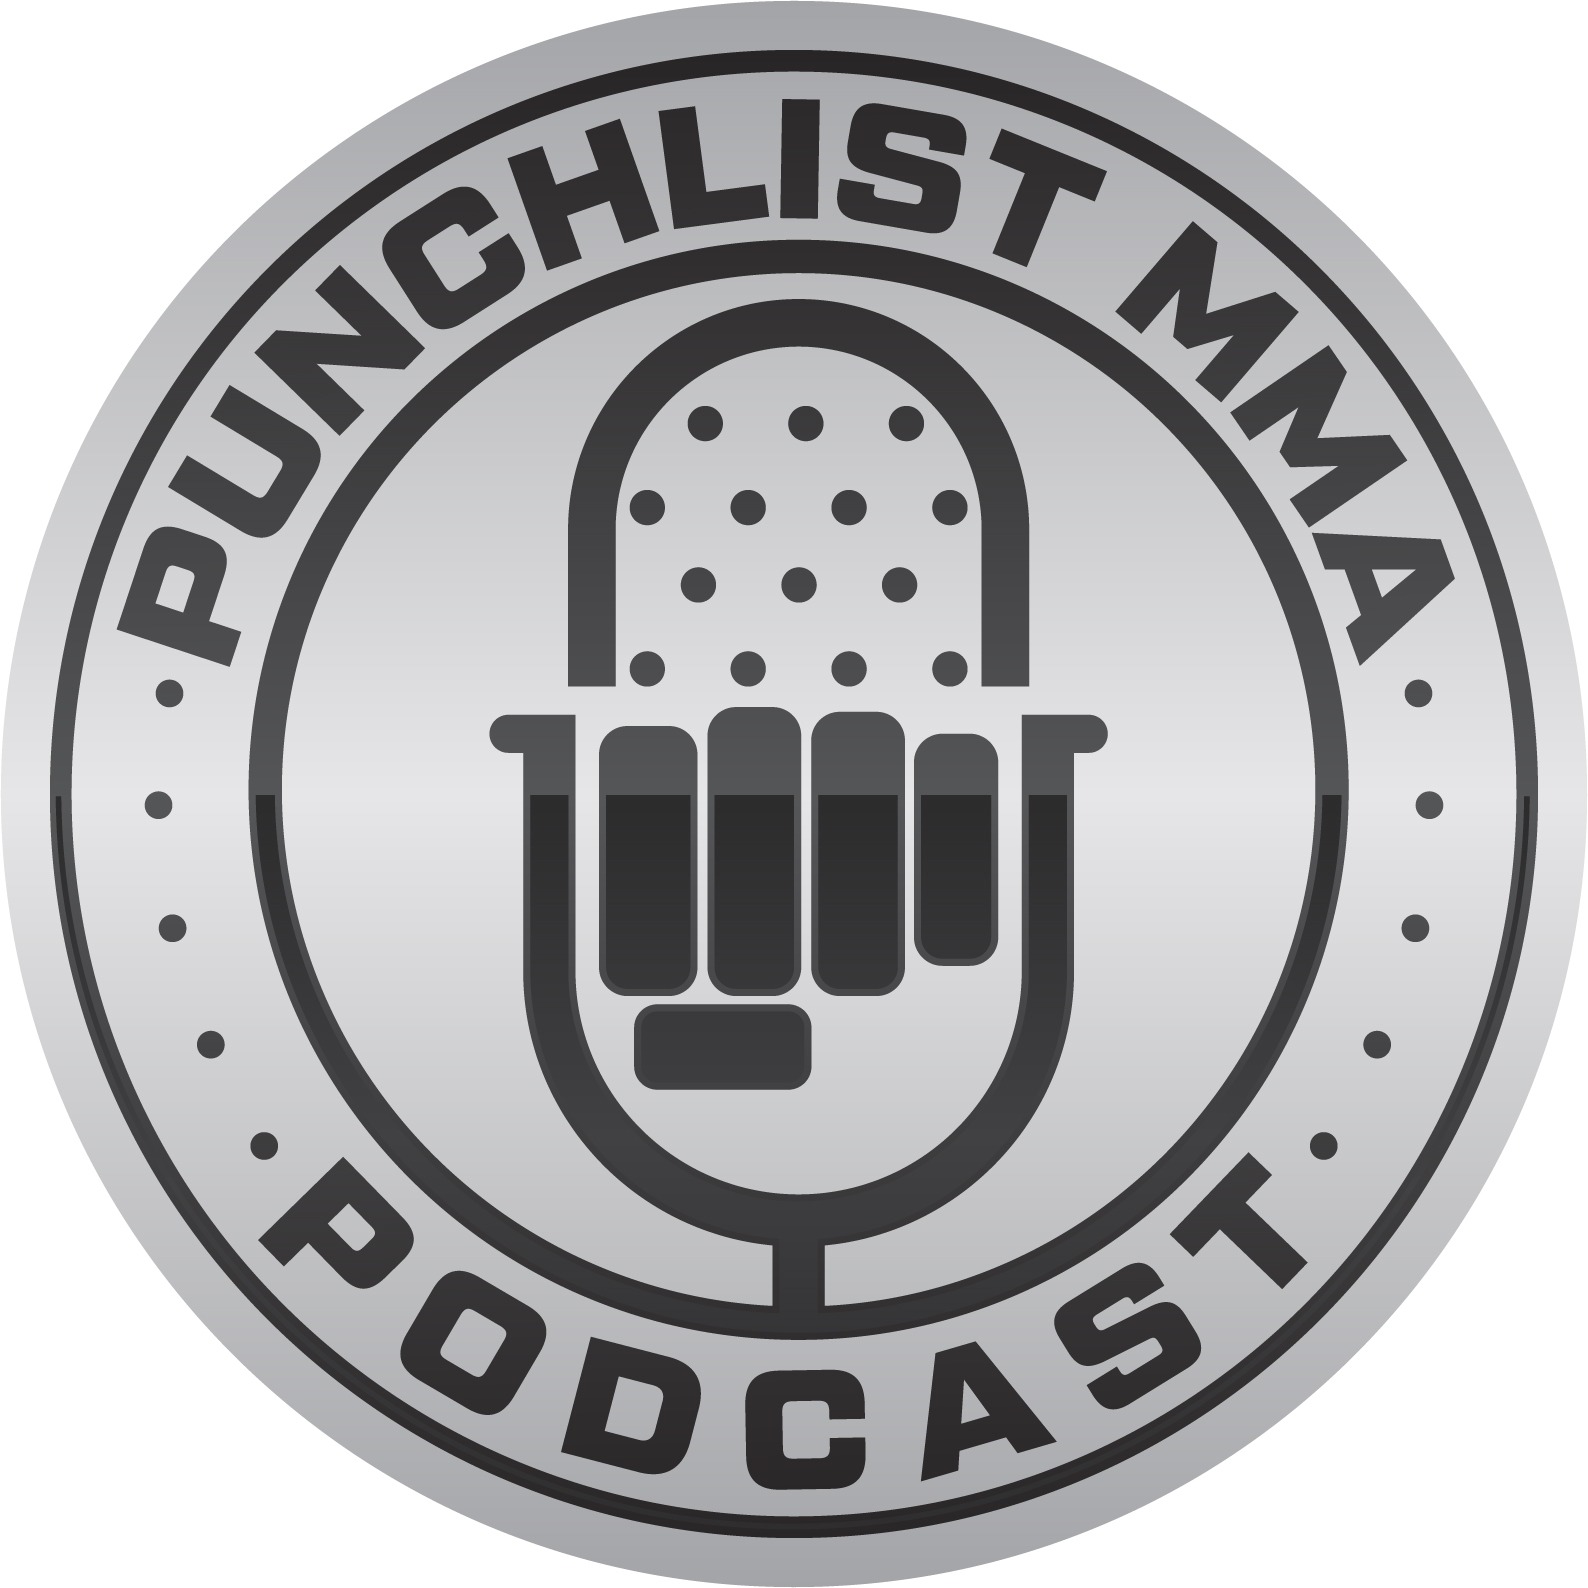 Punchlist MMA Official Betting Guide: UFC 274 OLIVEIRA vs GAETHJE